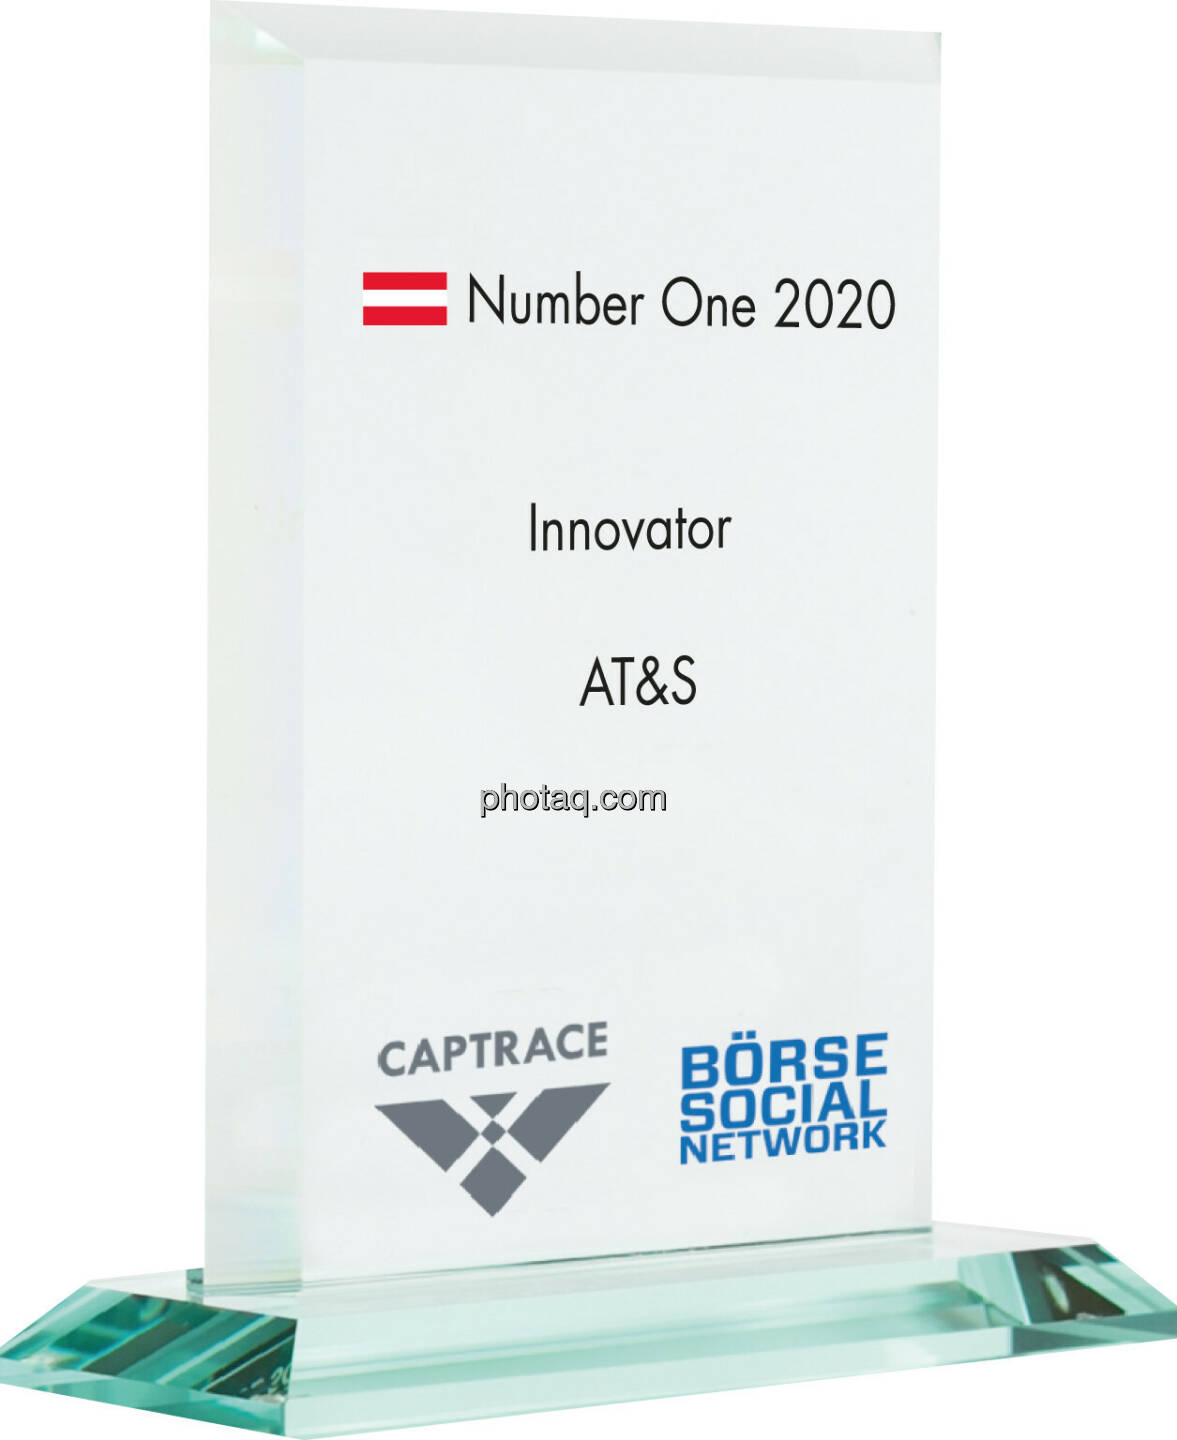 Number One Awards 2020 - Innovator AT&S